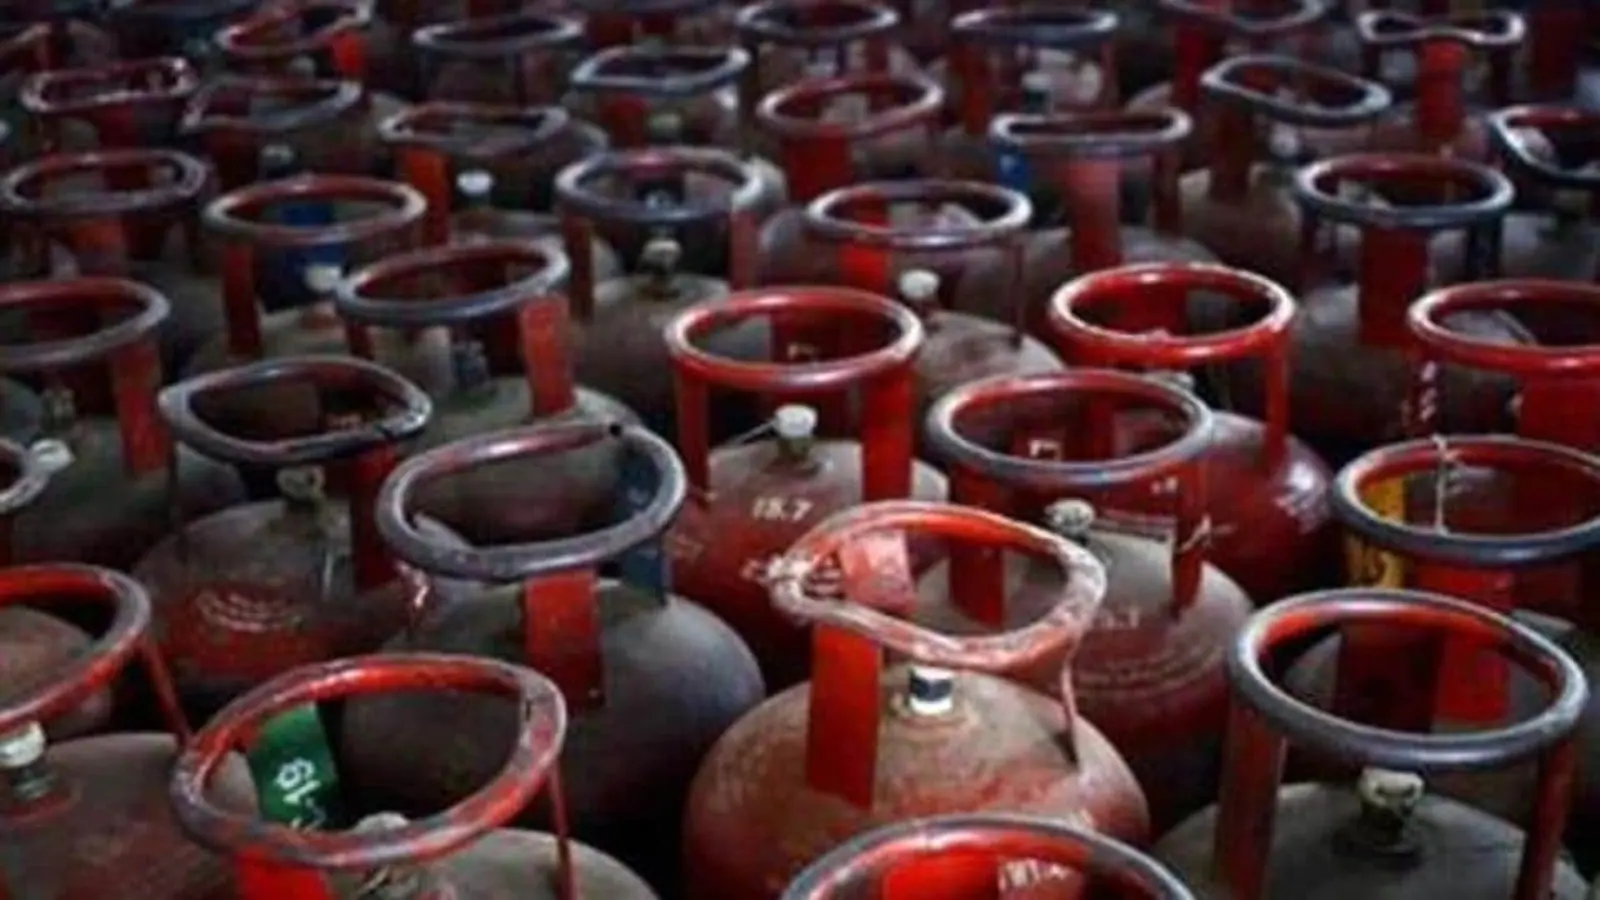 LPG prices hiked again, 19-kg commercial cylinder now costs ₹2,355.50